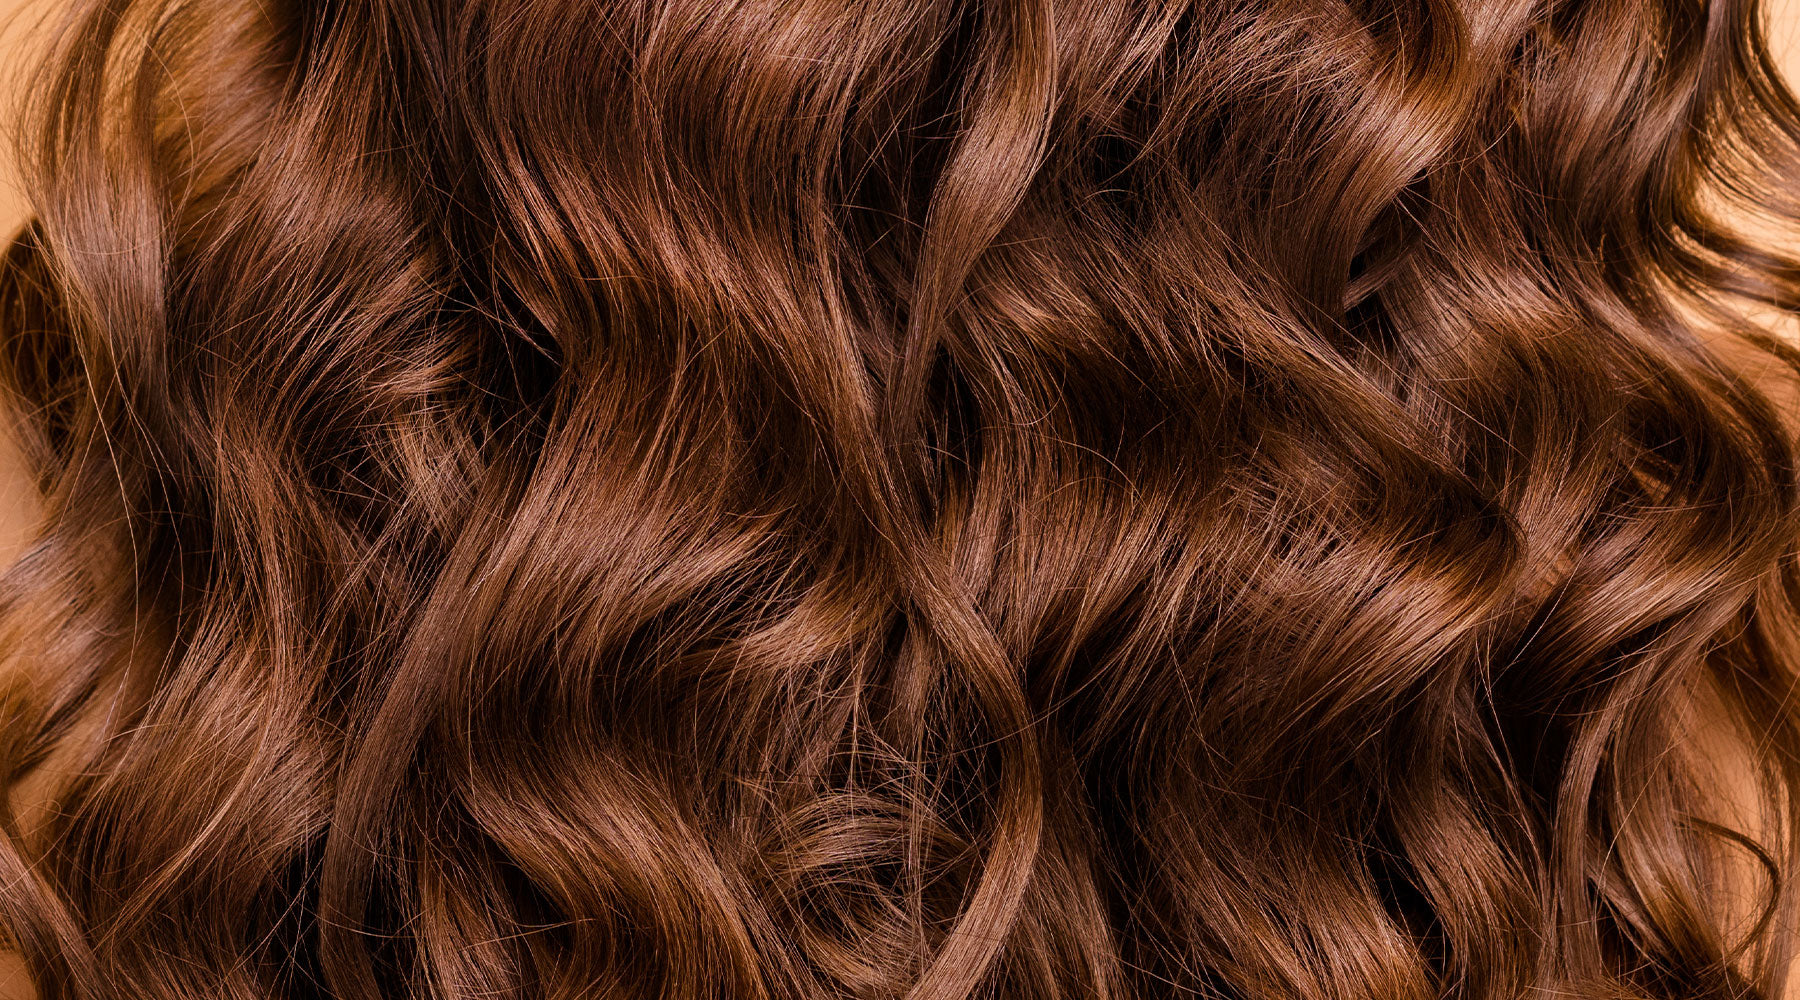 For those embracing the allure of deep, rich brunettes or experimenting with vibrant coloured hair, The DO Salon presents our Premium Brunette and Coloured Hair Collection.